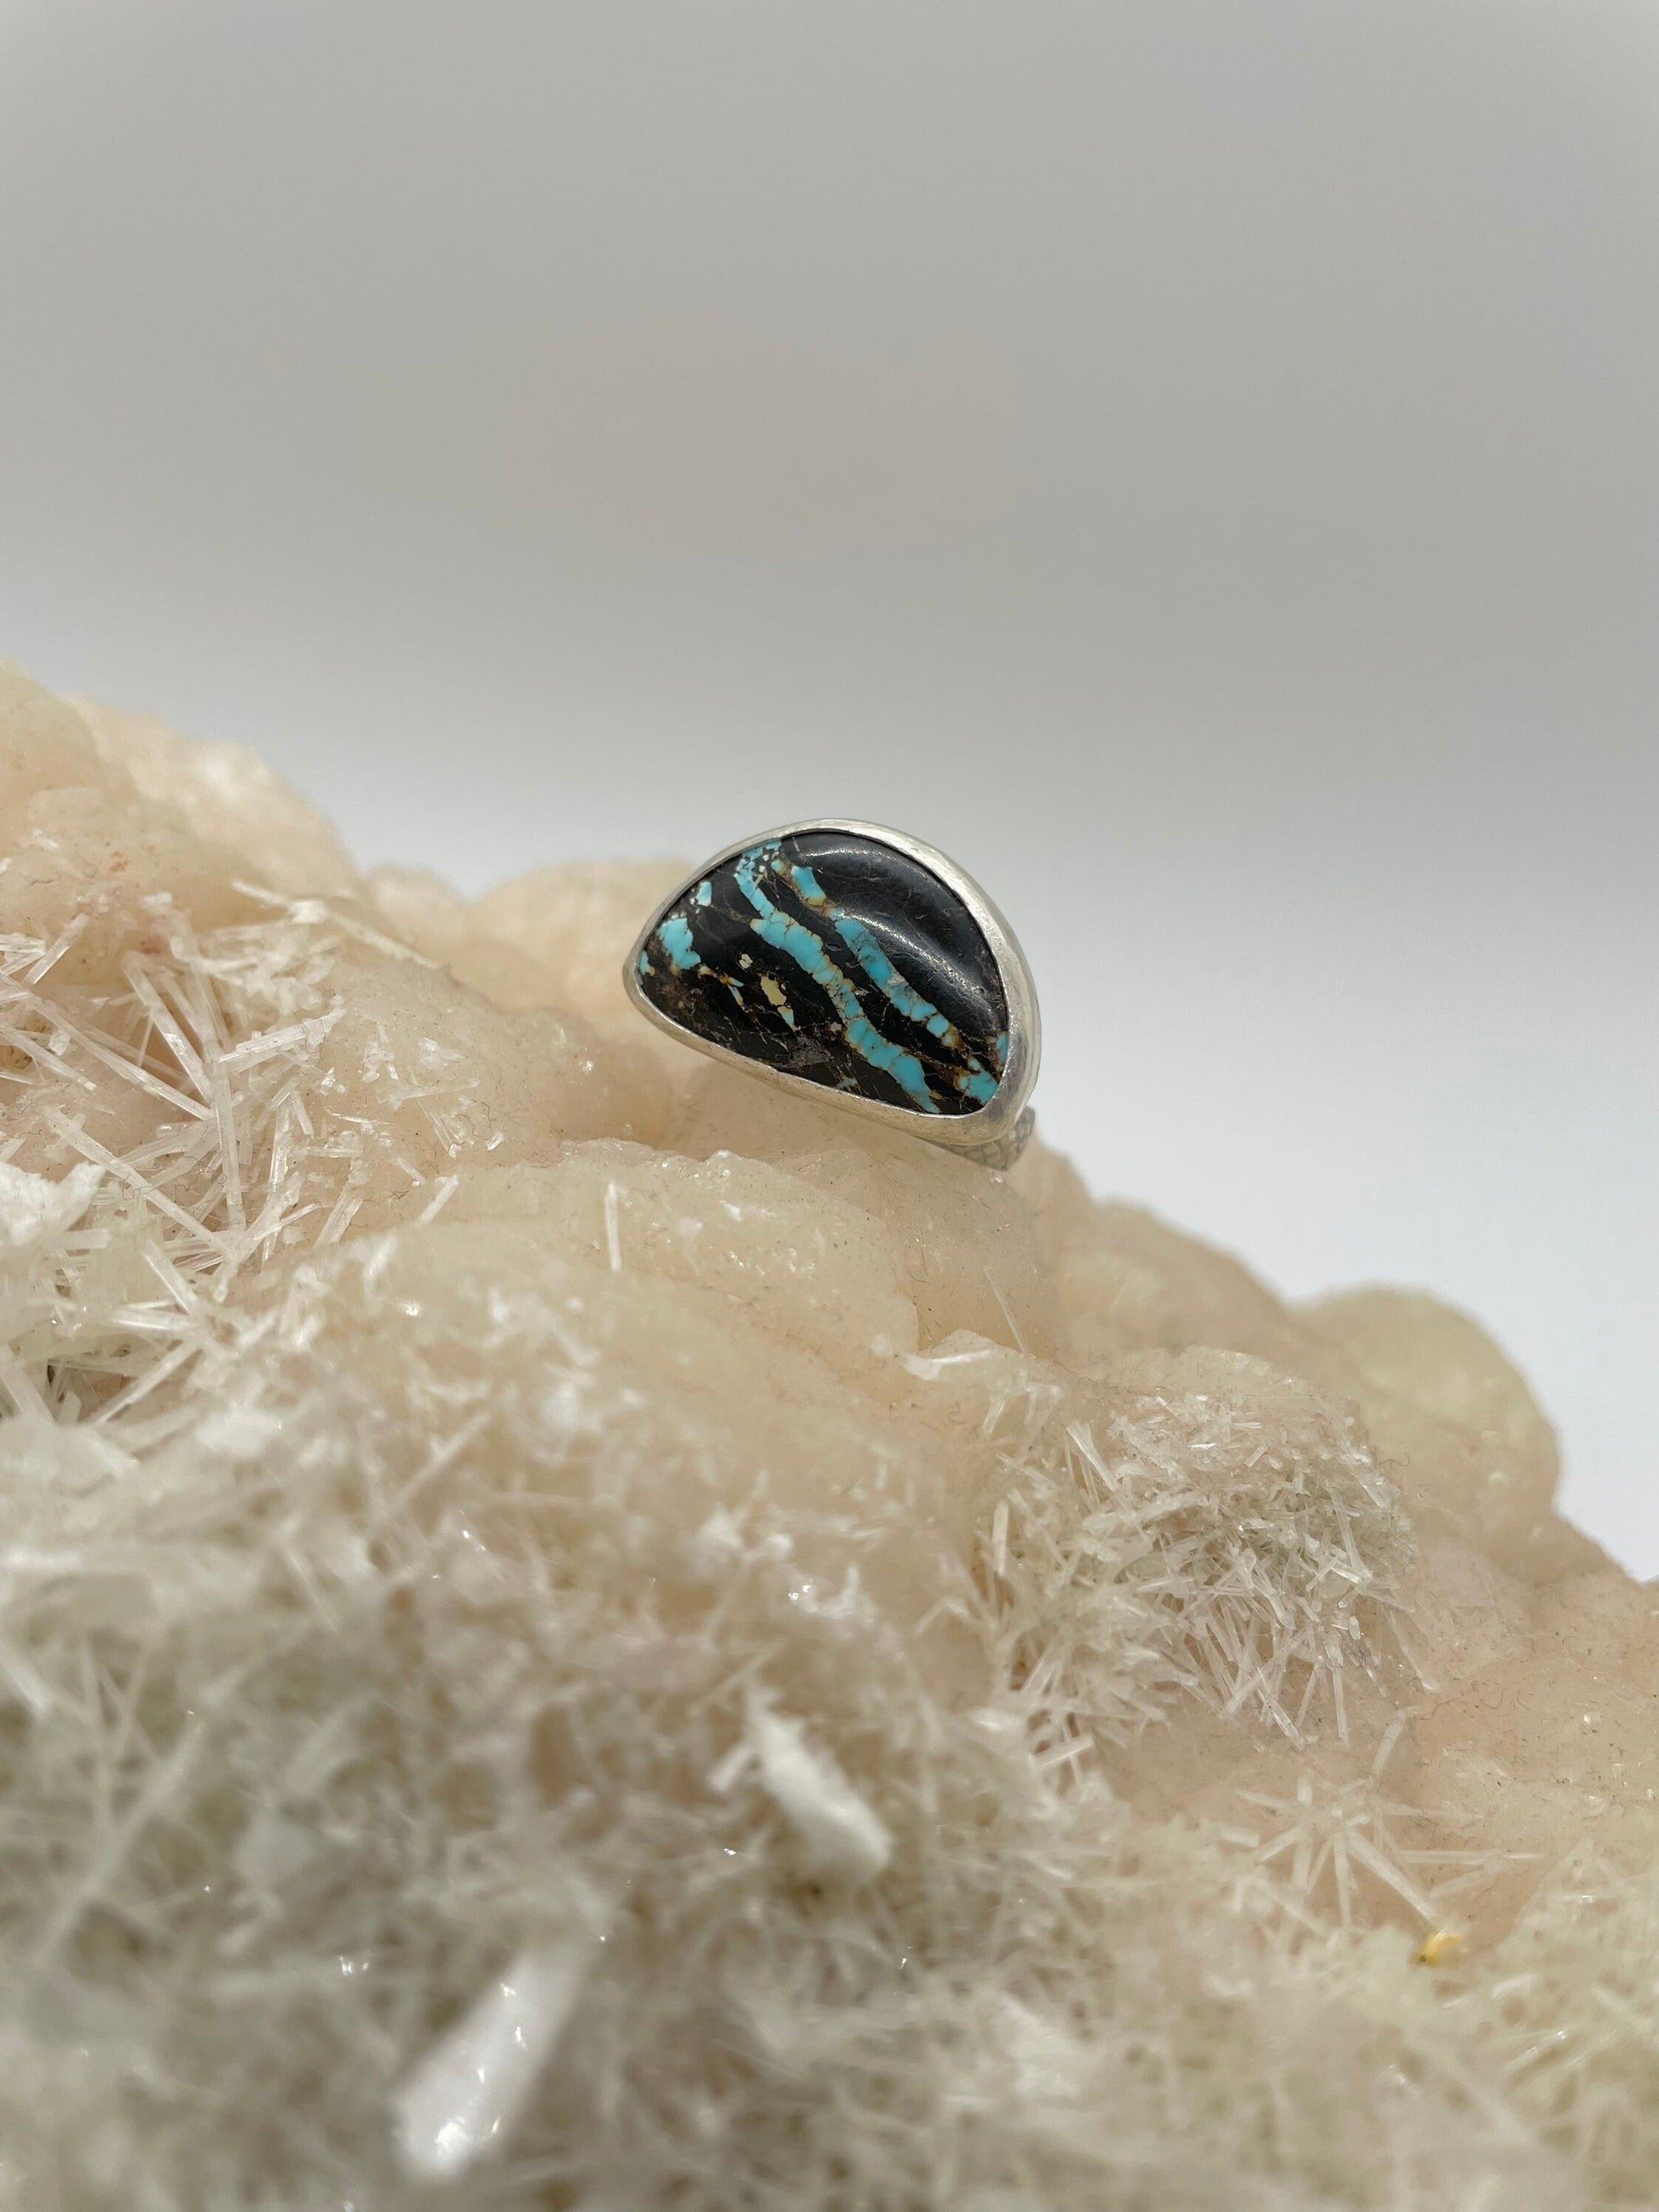 Blue Moon Turquoise ring with snake patterned band size 5.75